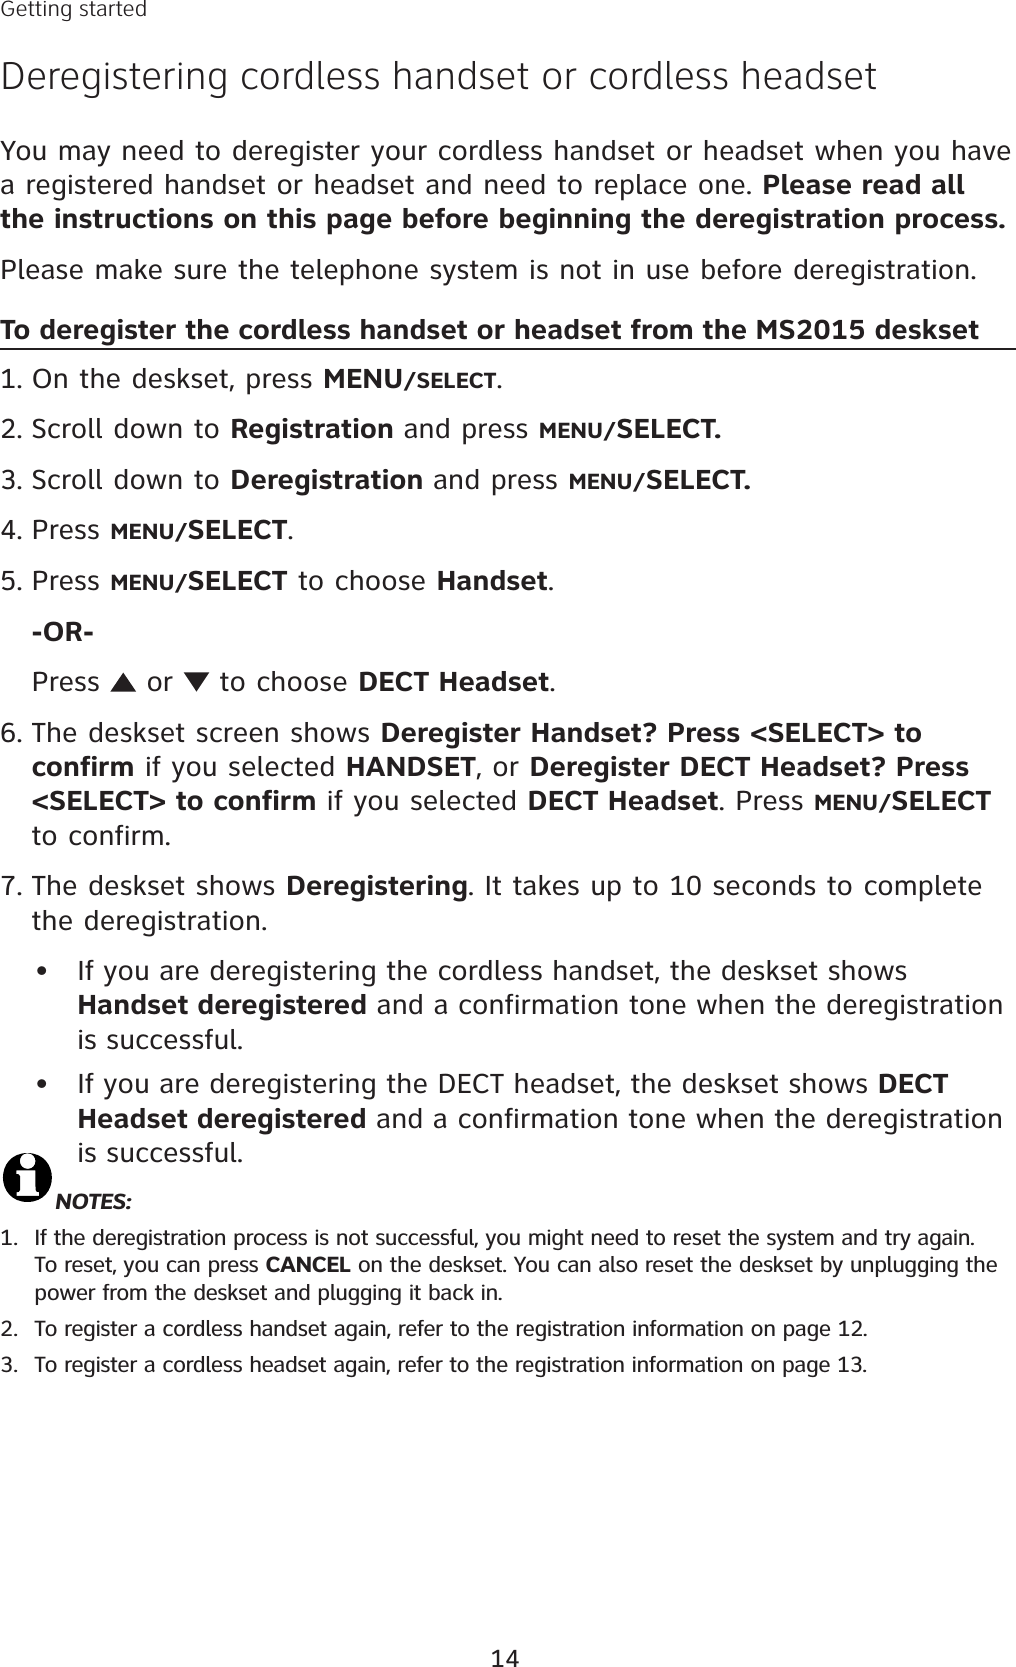 14You may need to deregister your cordless handset or headset when you have a registered handset or headset and need to replace one. Please read all the instructions on this page before beginning the deregistration process.Please make sure the telephone system is not in use before deregistration.To deregister the cordless handset or headset from the MS2015 desksetOn the deskset, press MENU/SELECT.Scroll down to Registration and press MENU/SELECT.Scroll down to Deregistration and press MENU/SELECT.Press MENU/SELECT.Press MENU/SELECT to choose Handset.-OR-Press   or   to choose DECT Headset.The deskset screen shows Deregister Handset? Press &lt;SELECT&gt; to confirm if you selected HANDSET, or Deregister DECT Headset? Press &lt;SELECT&gt; to confirm if you selected DECT Headset. Press MENU/SELECTto confirm.The deskset shows Deregistering. It takes up to 10 seconds to complete the deregistration. If you are deregistering the cordless handset, the deskset shows Handset deregistered and a confirmation tone when the deregistration is successful.If you are deregistering the DECT headset, the deskset shows DECT Headset deregistered and a confirmation tone when the deregistration is successful.NOTES: If the deregistration process is not successful, you might need to reset the system and try again. To reset, you can press CANCEL on the deskset. You can also reset the deskset by unplugging the power from the deskset and plugging it back in.To register a cordless handset again, refer to the registration information on page 12.To register a cordless headset again, refer to the registration information on page 13.1.2.3.4.5.6.7.••1.2.3.Getting startedDeregistering cordless handset or cordless headset